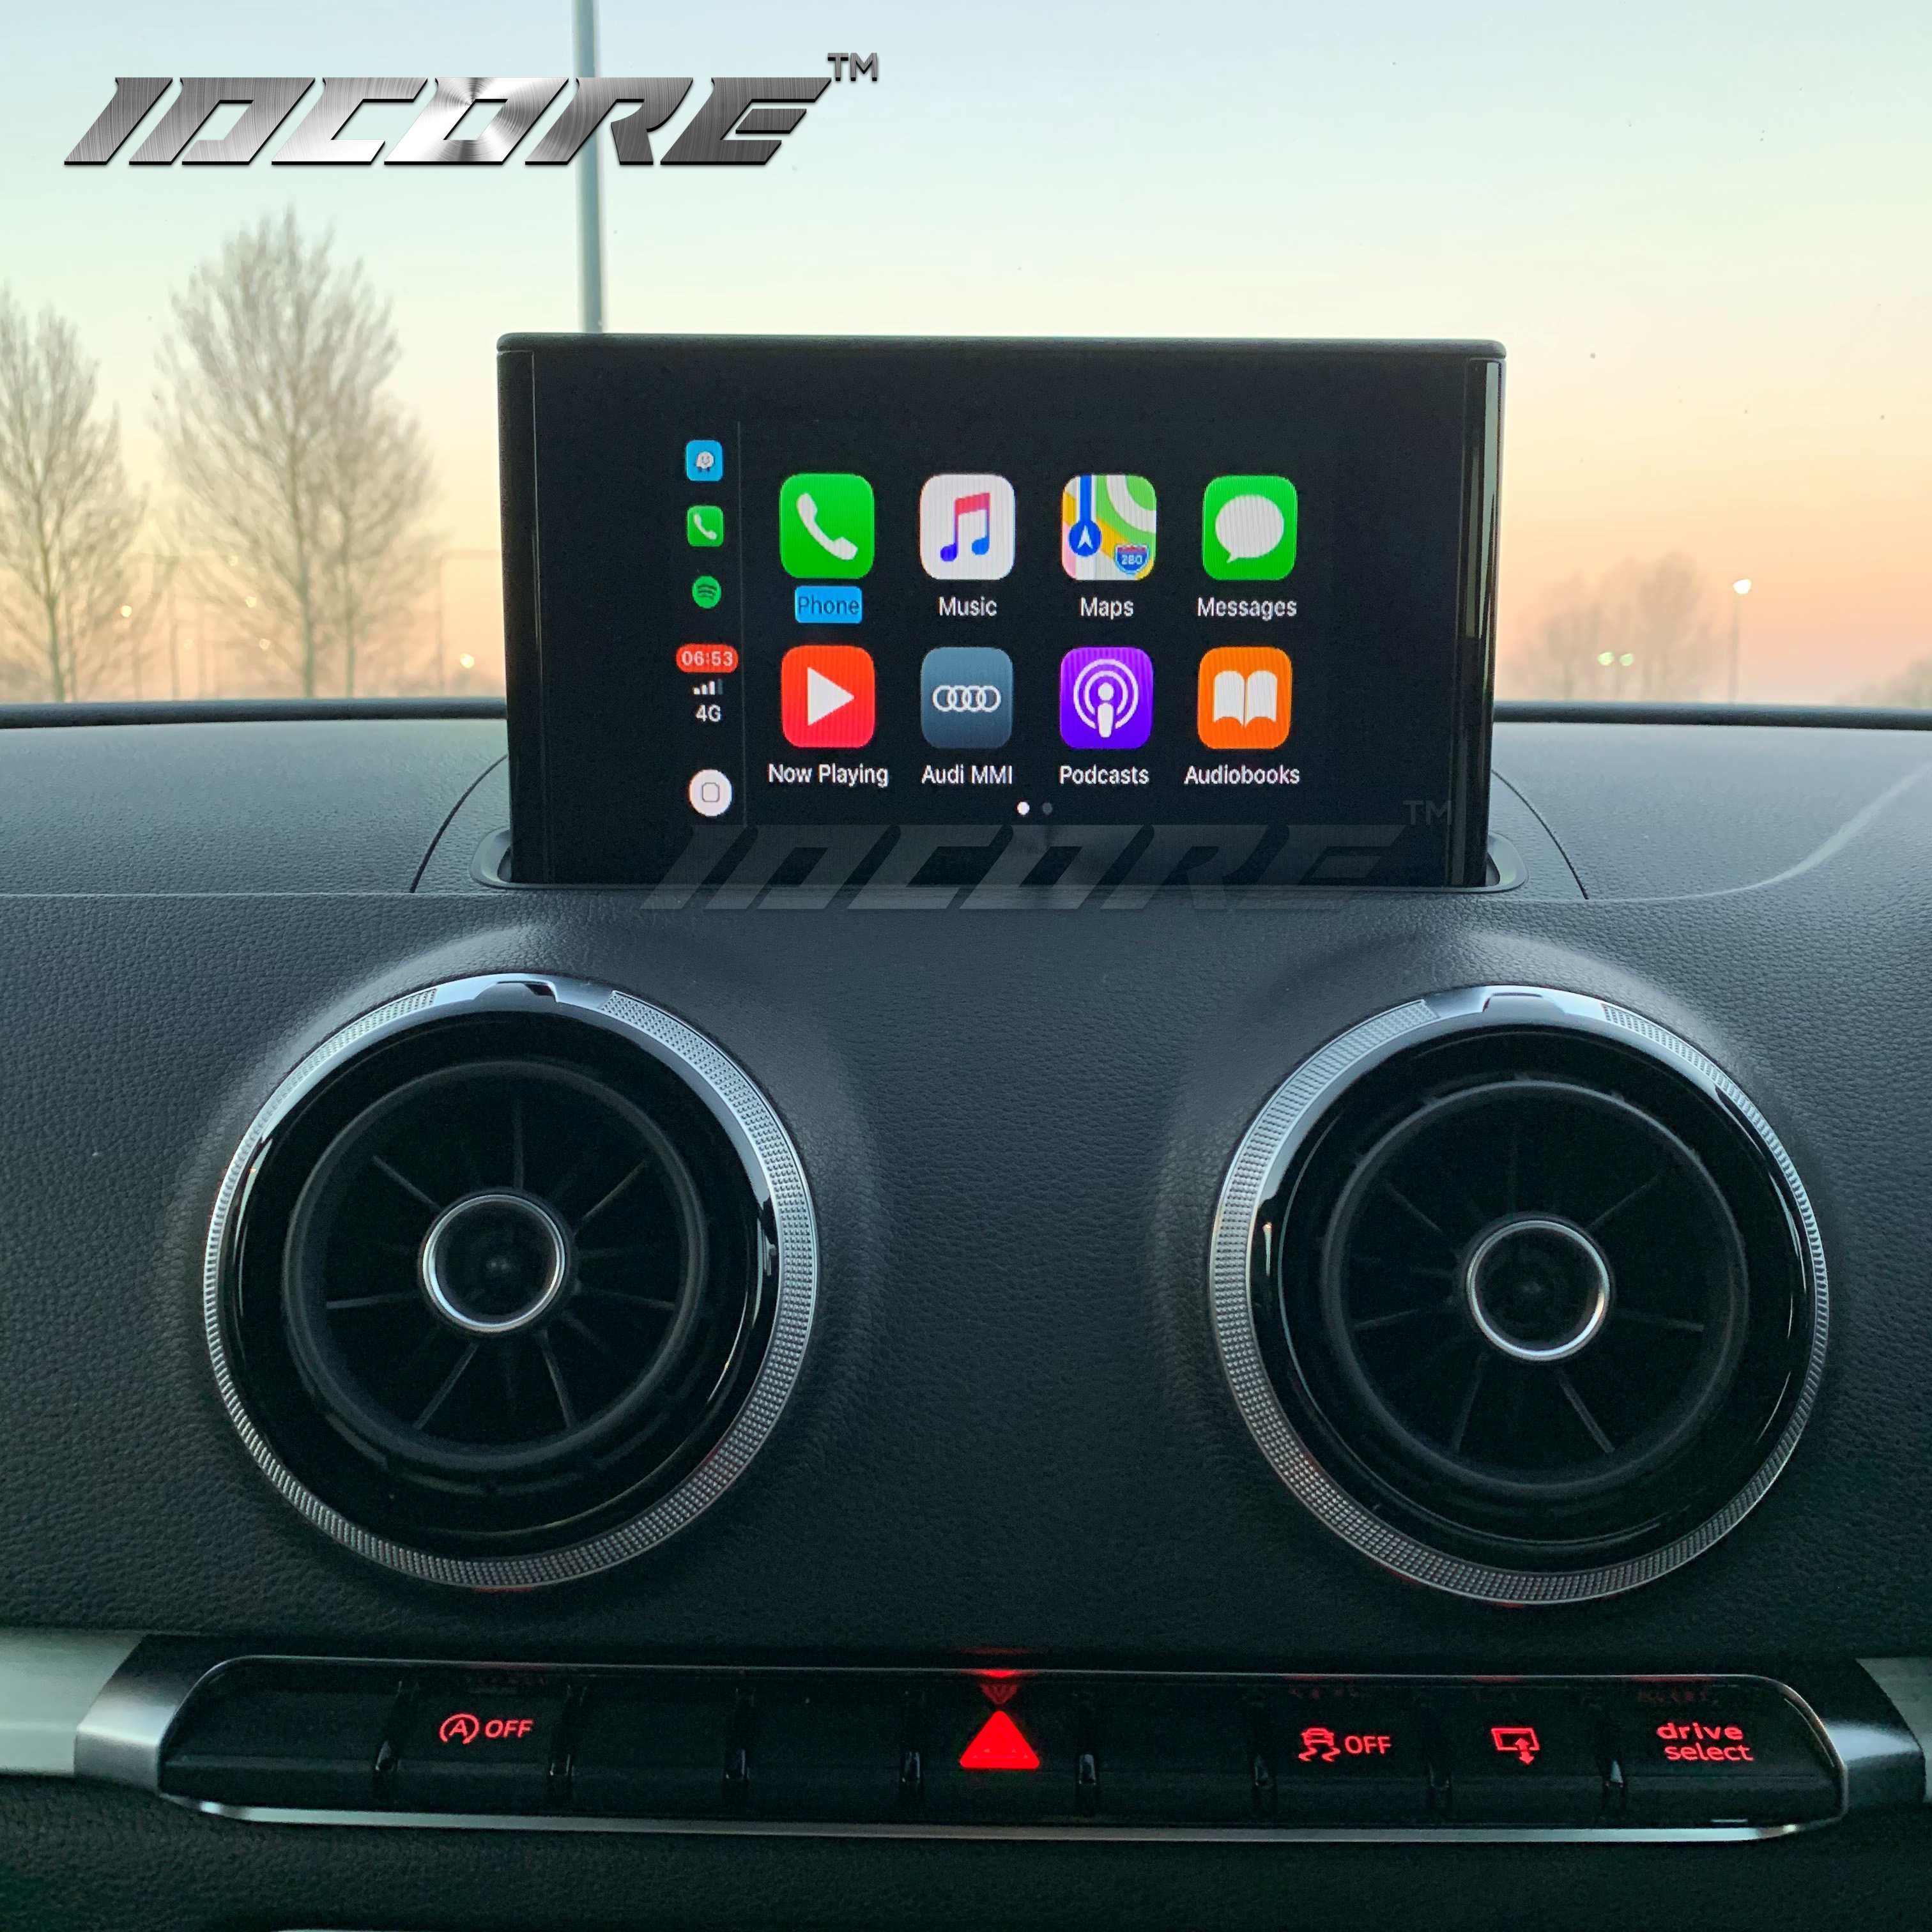 Wireless Apple Carplay Android Auto Interface Adapter For Audi A3